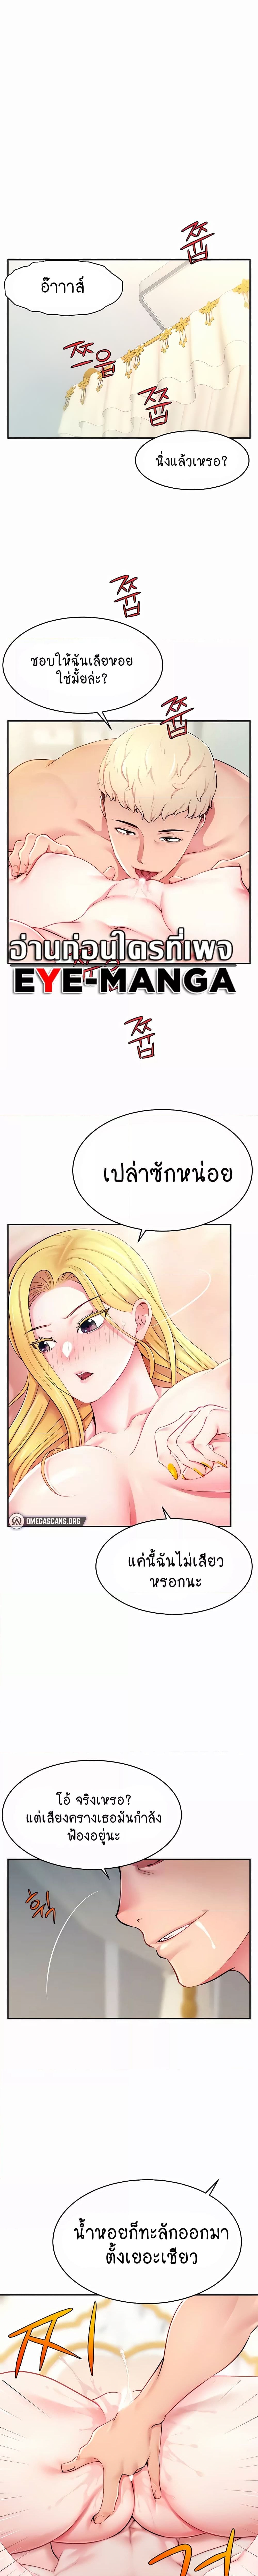 Making Friends With Streamers by Hacking! ตอนที่ 5 ภาพ 5